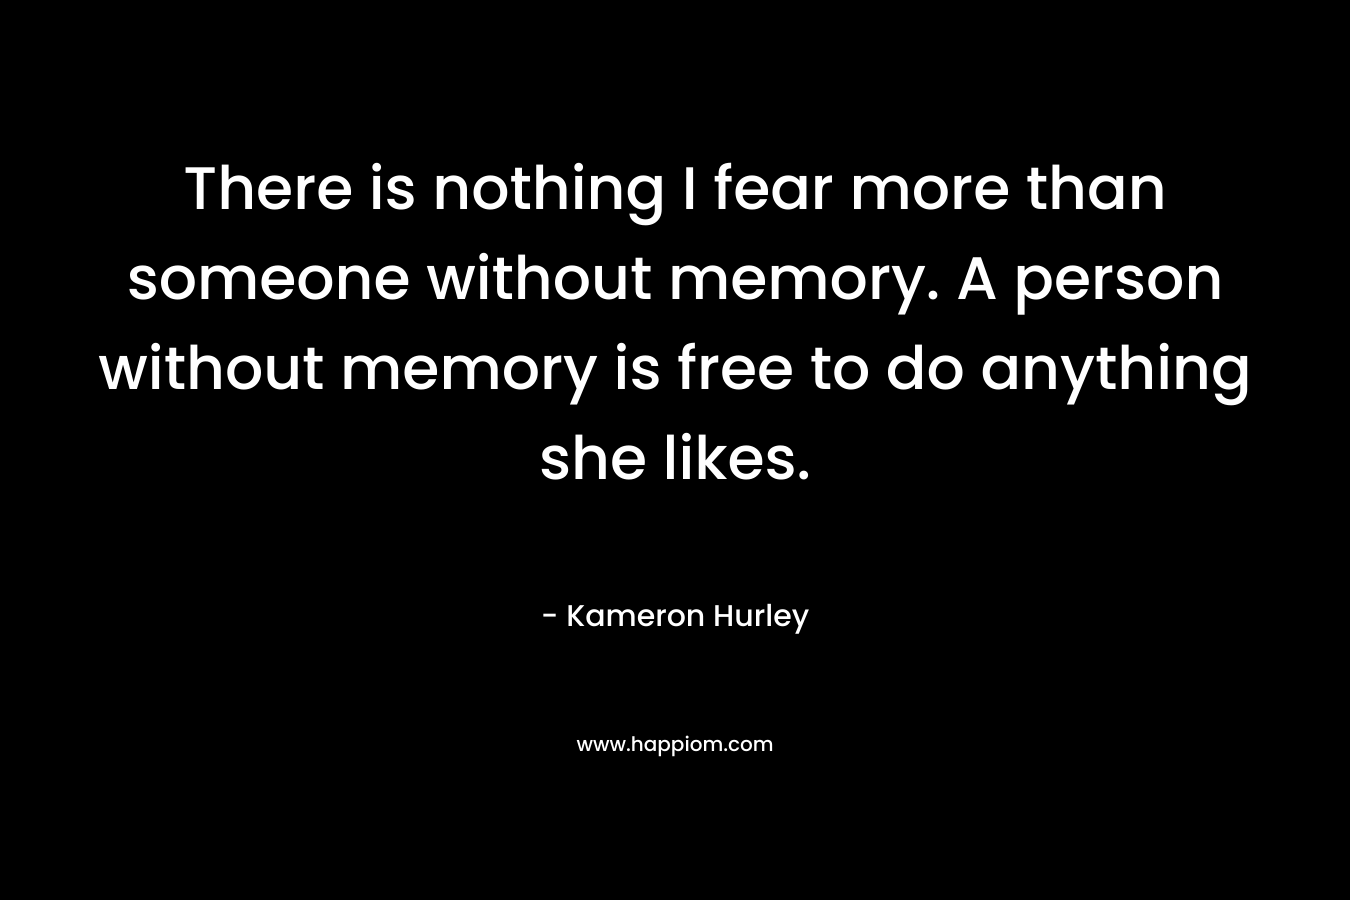 There is nothing I fear more than someone without memory. A person without memory is free to do anything she likes.